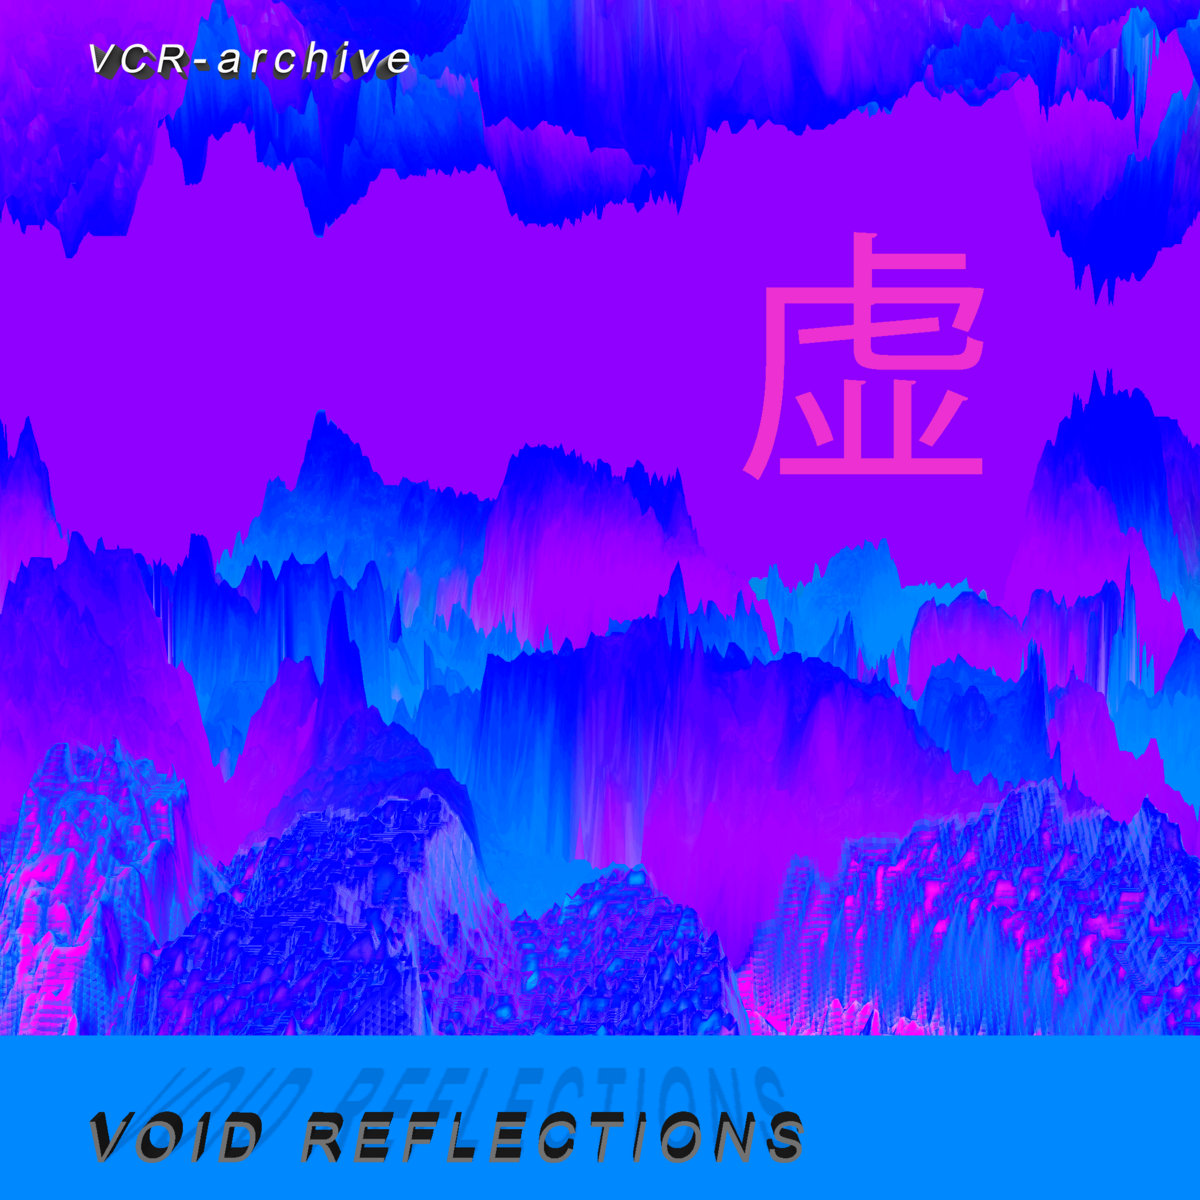 Void Reflections | VCR-archive